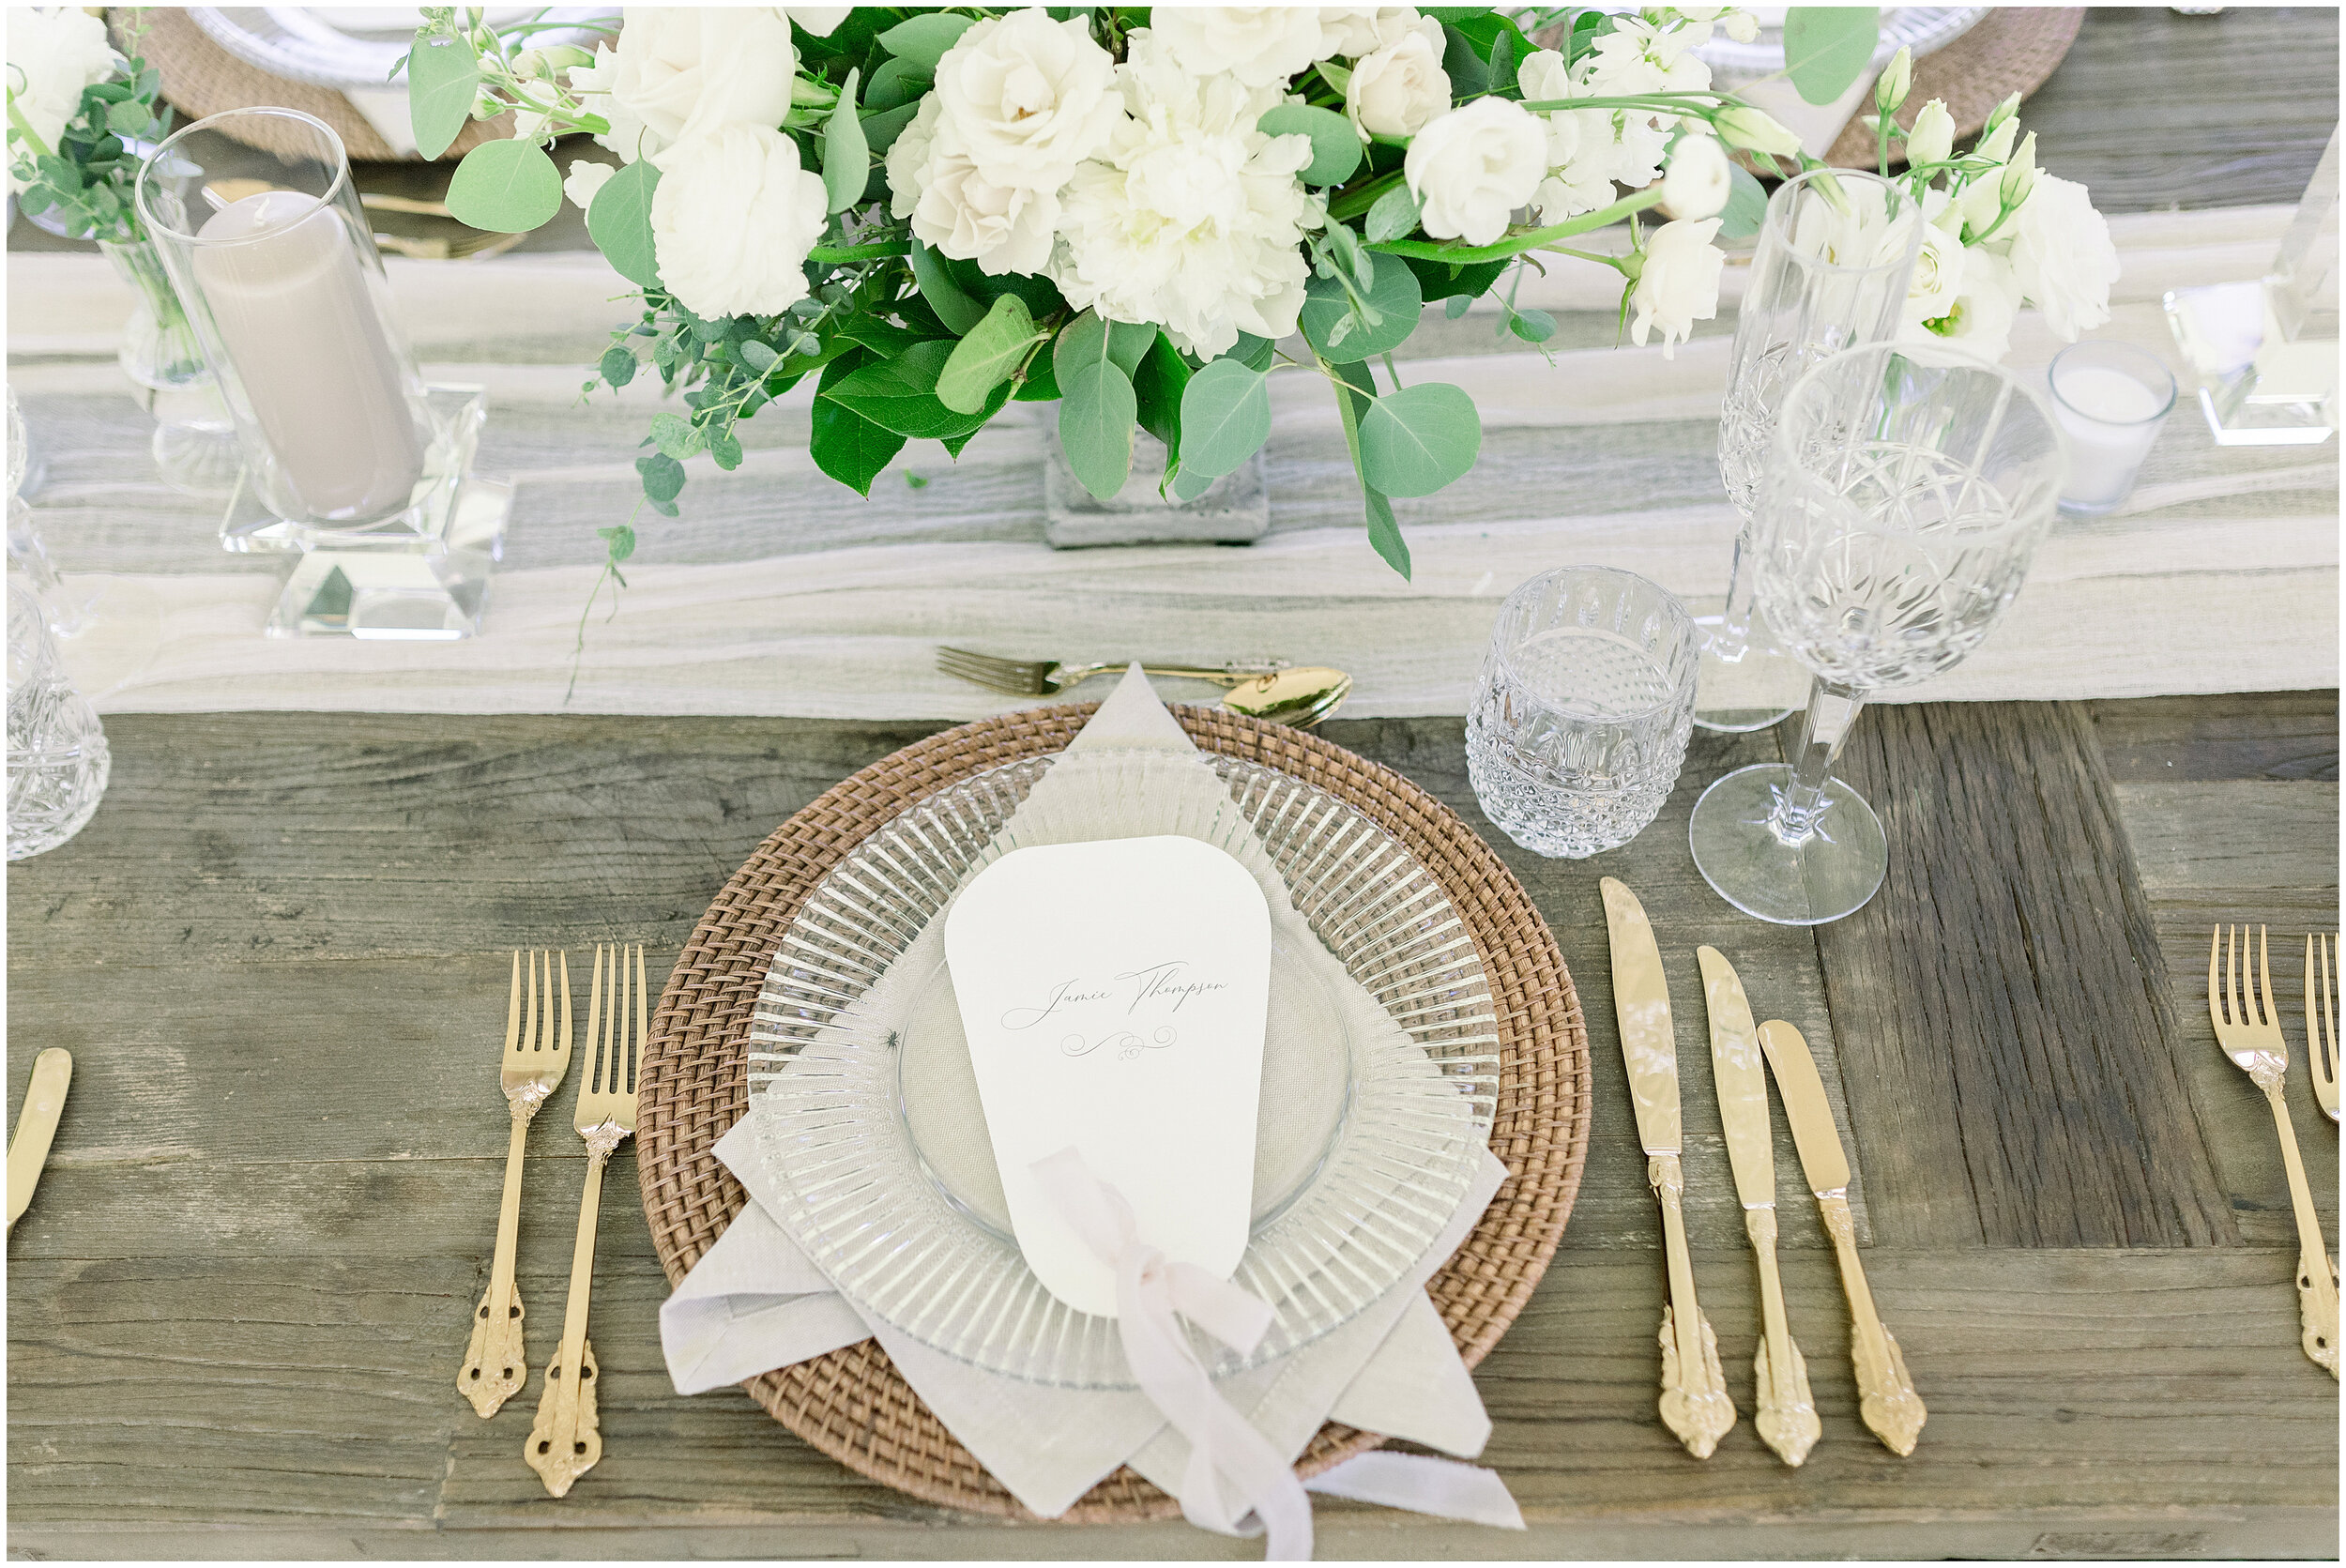  Gold and white place settings for outdoor boho wedding dinner with cursive place cards by Chelsea Morgan Photography in Ottawa, ON. ideas for place settings for wedding dinner outdoor wedding place settings how to set table for wedding dinner gold a